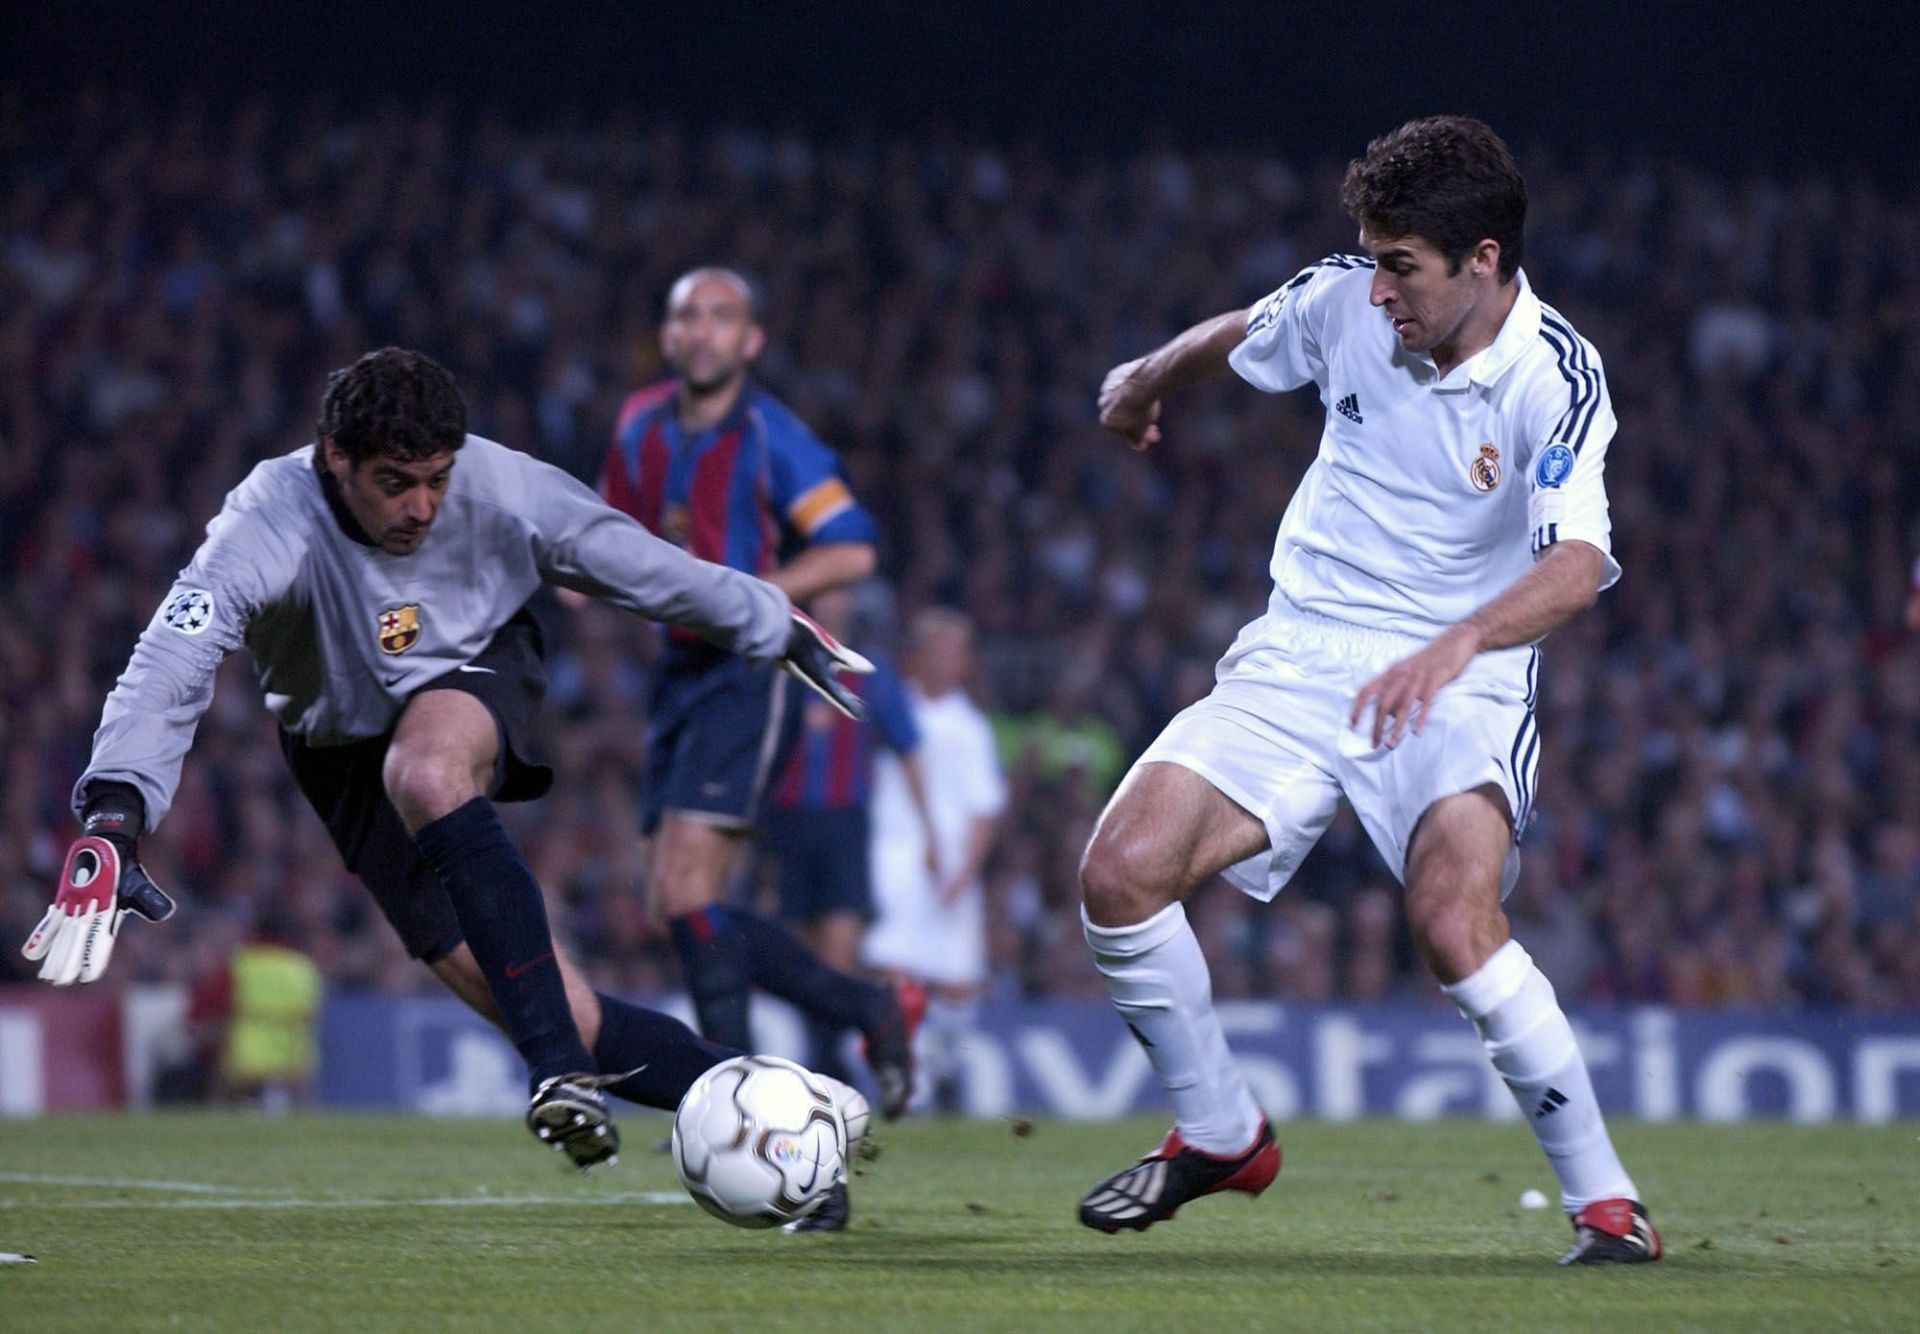 Barcelona v Real Madrid: Raul tries to round the keeper